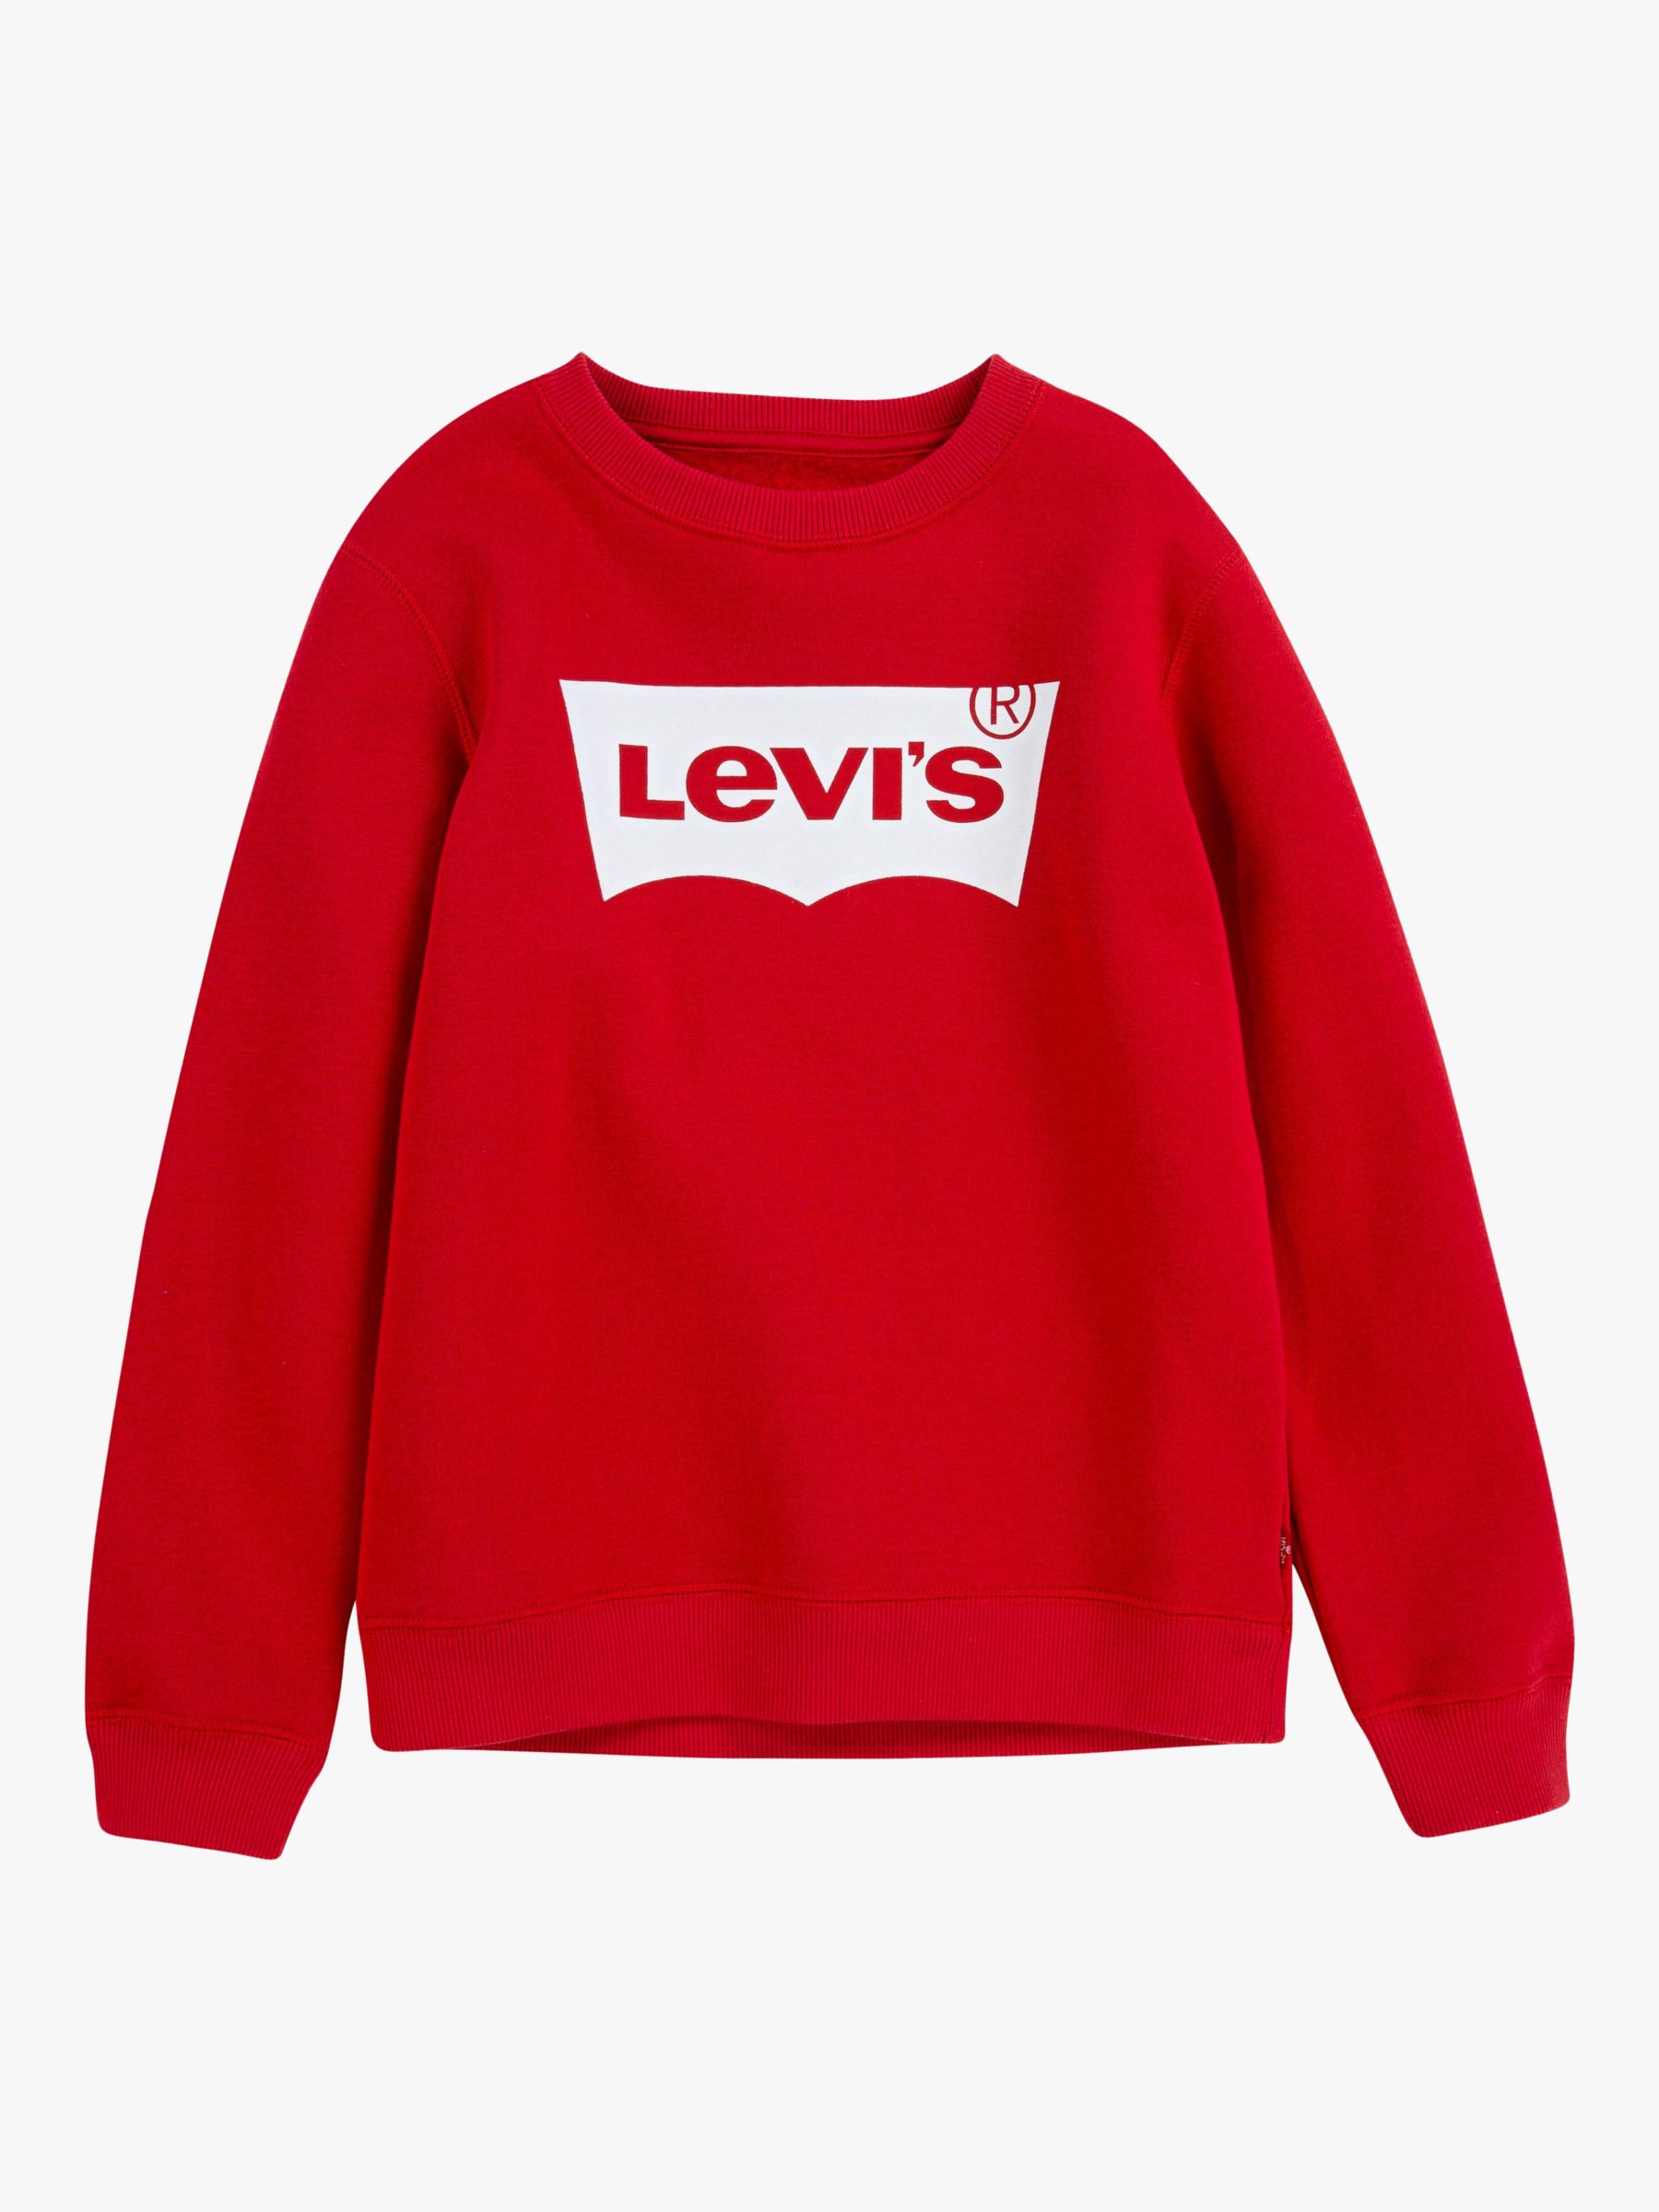 levi's red jumper